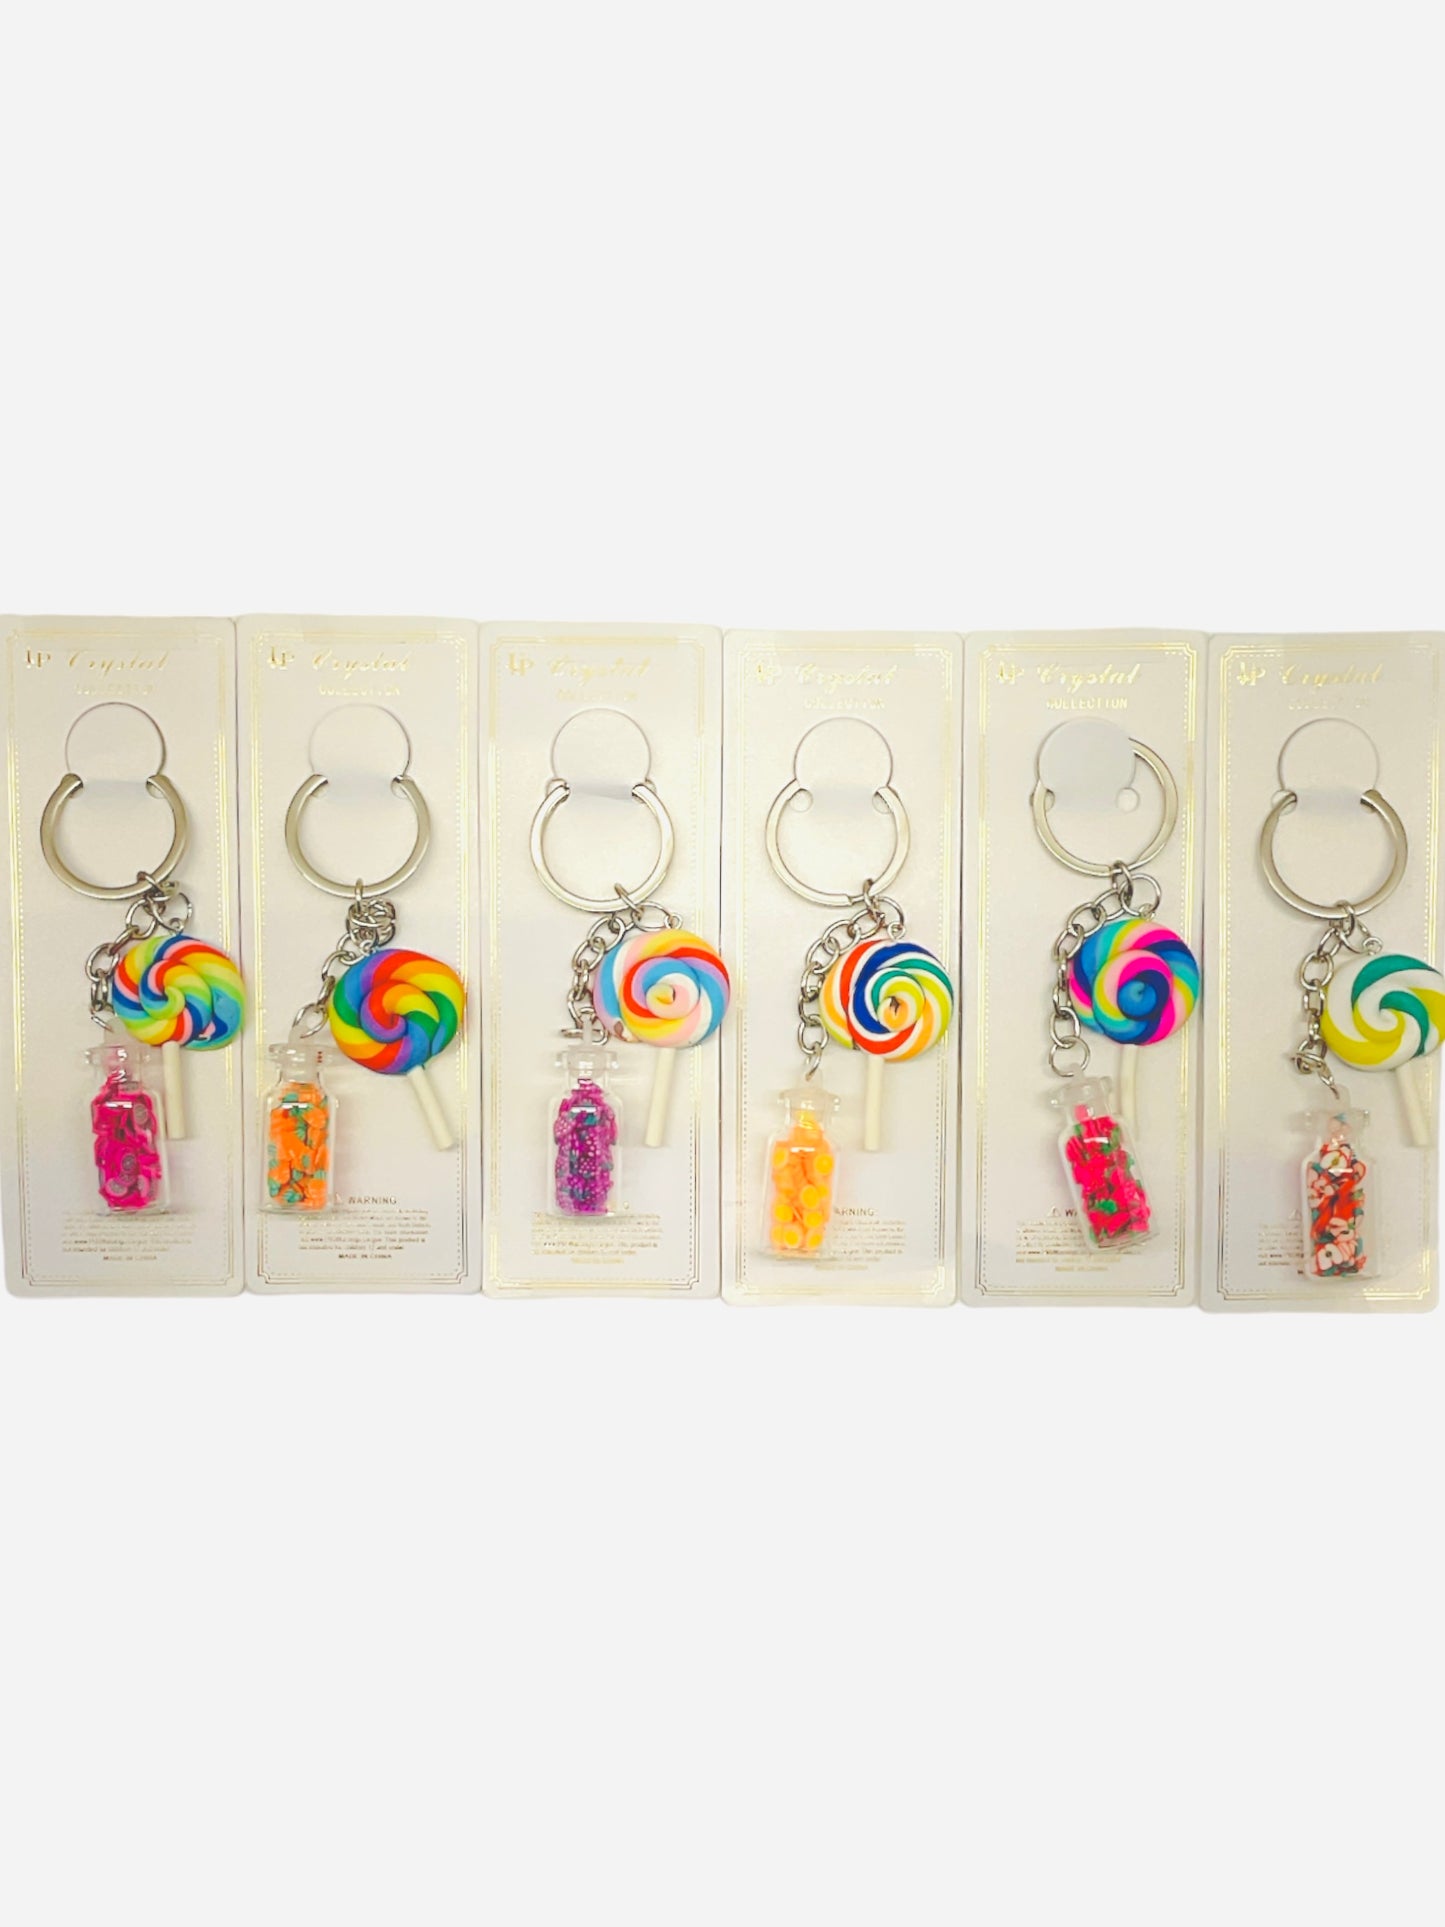 Crystal Collection Fruit and Lollipop Key Chains (Chosen at Random)